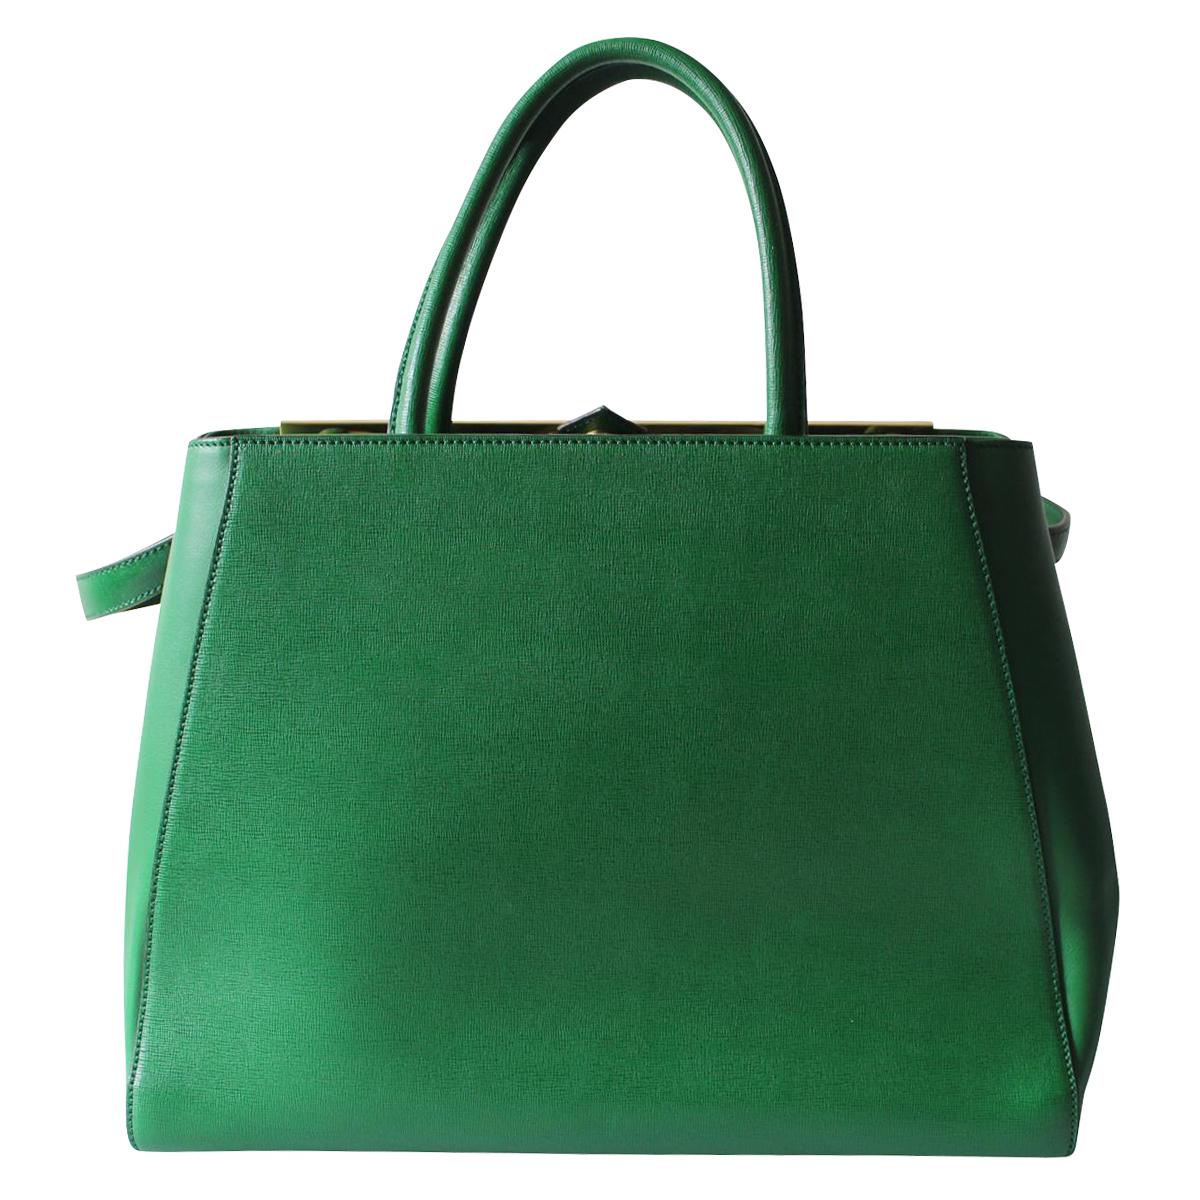 Super chic Fendi bag
Wonderful color
Saffiano leather
Green color
Double handle
Two compartments
Metal insert
Internal zip pocket
Additional two pockets
Can be carried crossbody too
Cm 35 x 28 x 14 (13.7 x 11 x 5.5 inches)
Dustbag included
Worldwide